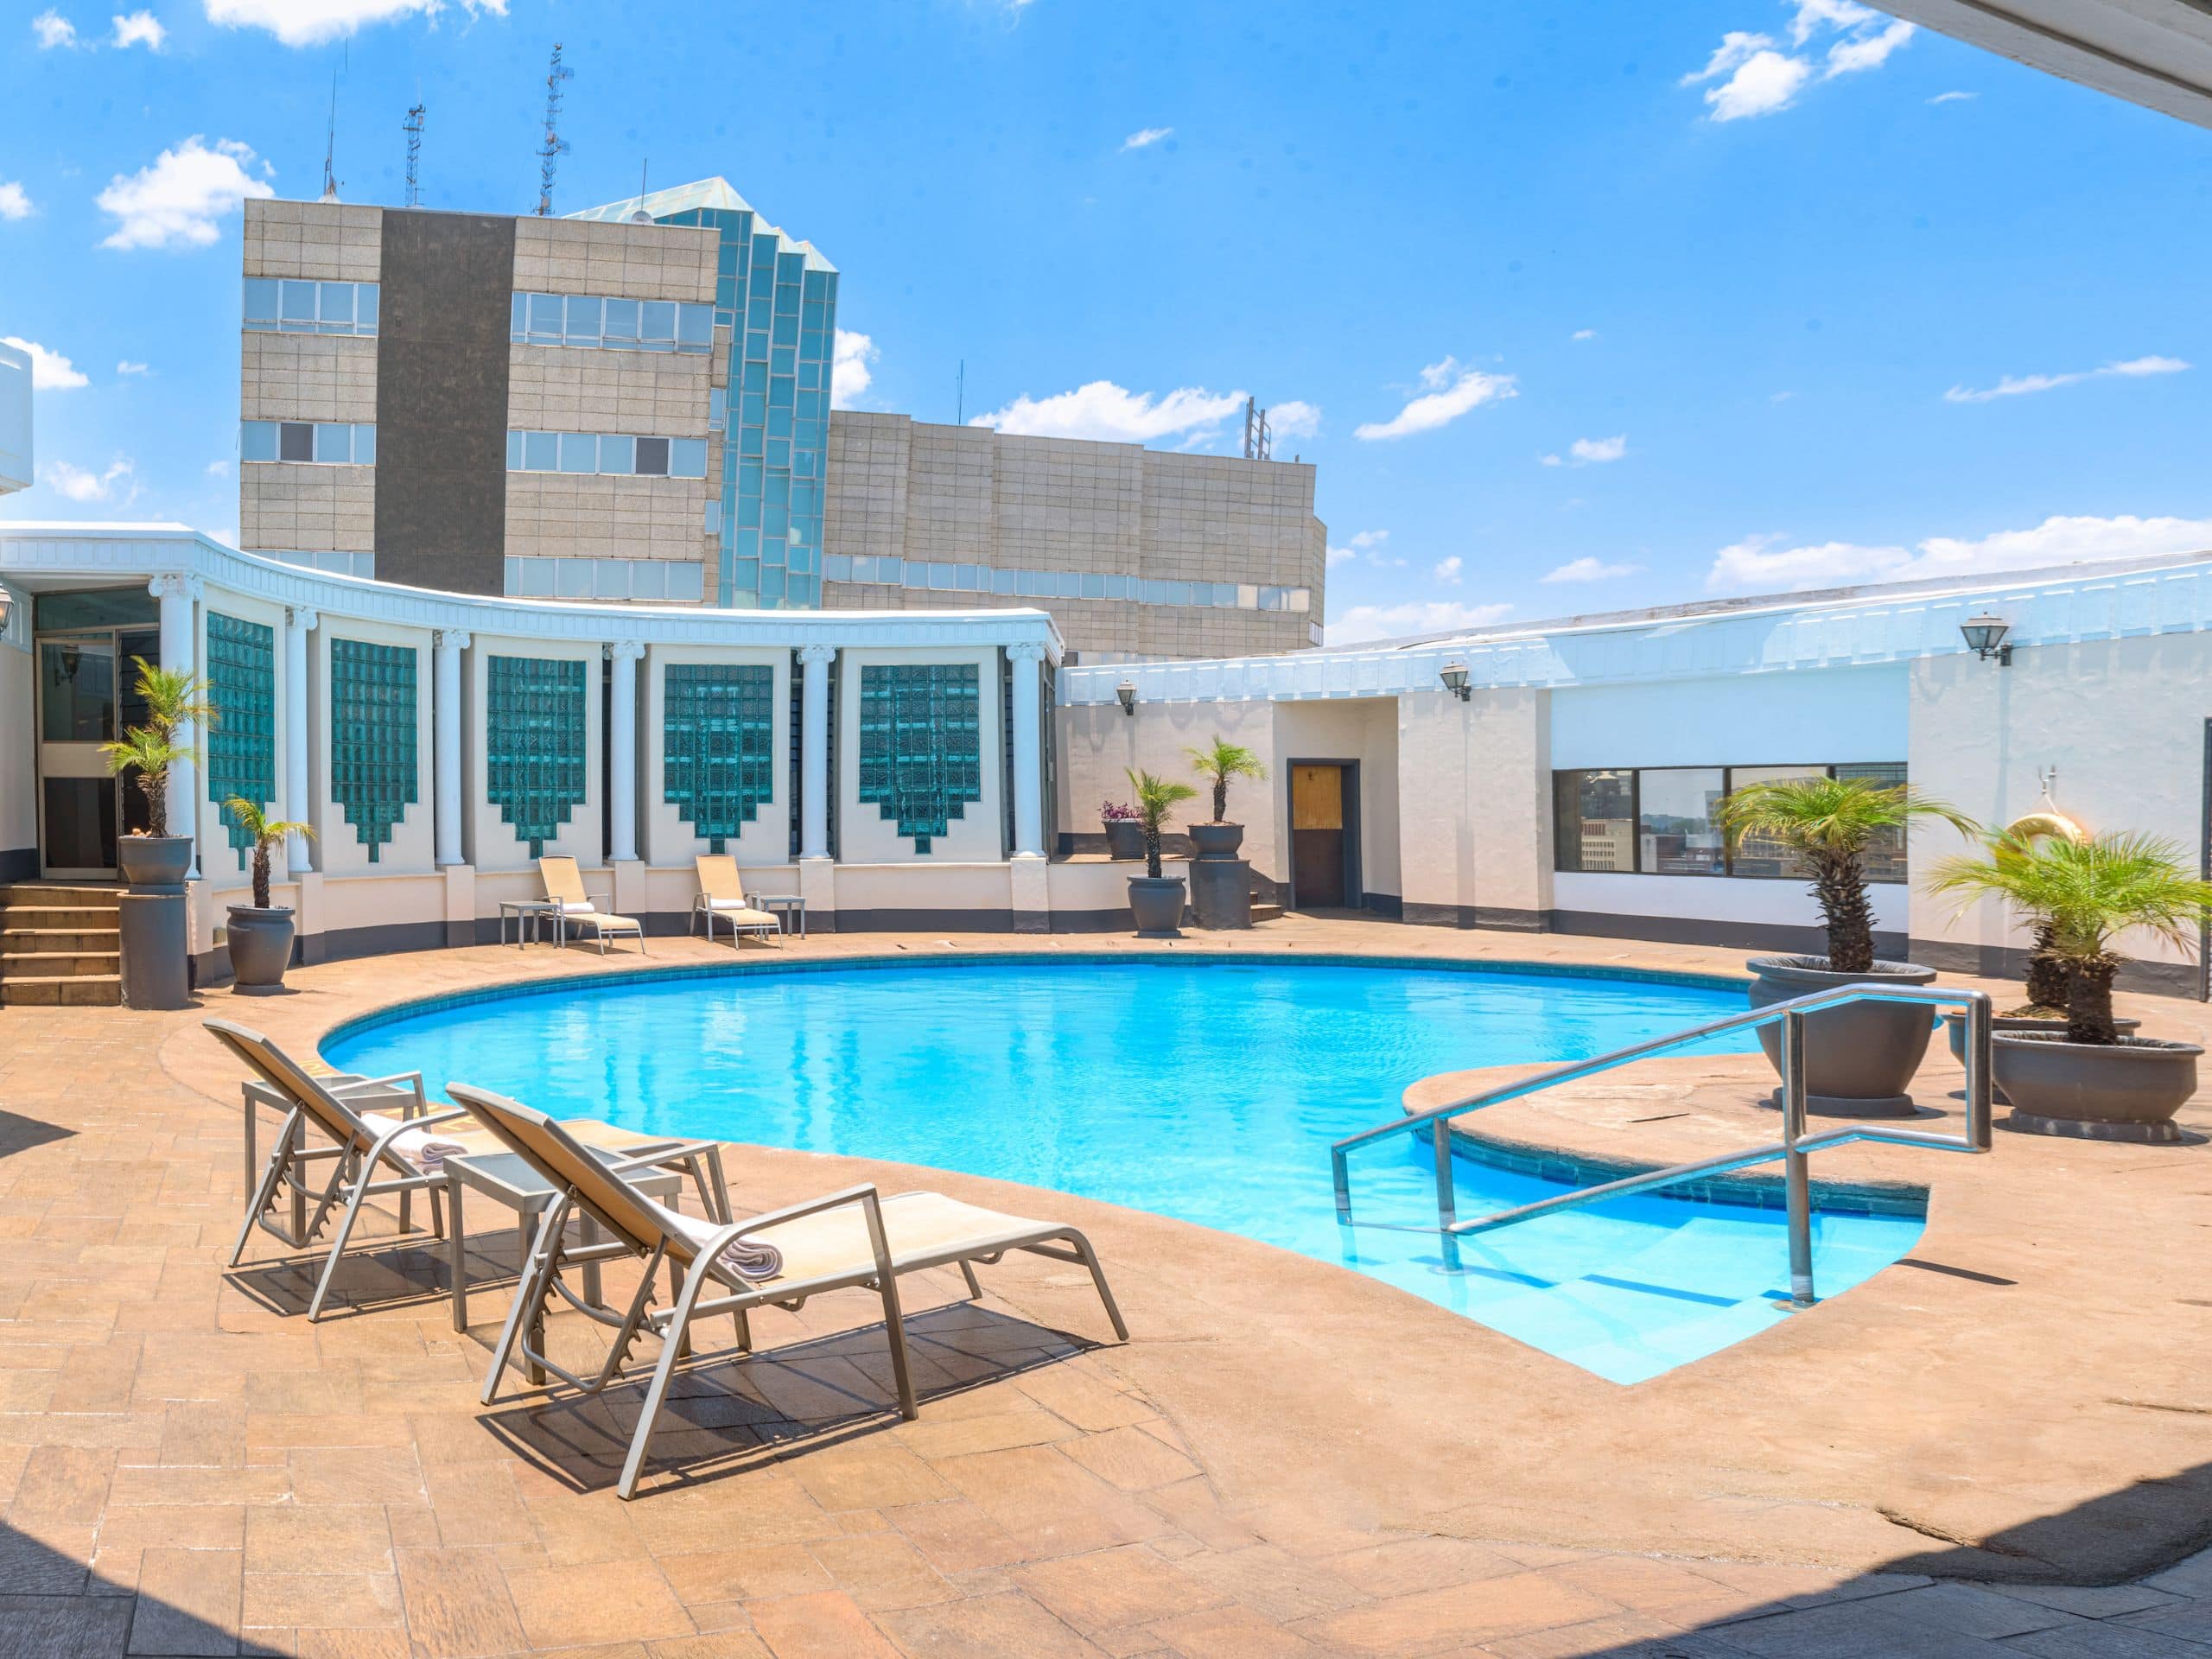 The luxurious Hyatt Regency Harare The Meikles hotel in Harare features a magnificent swimming pool right in the heart of the building.